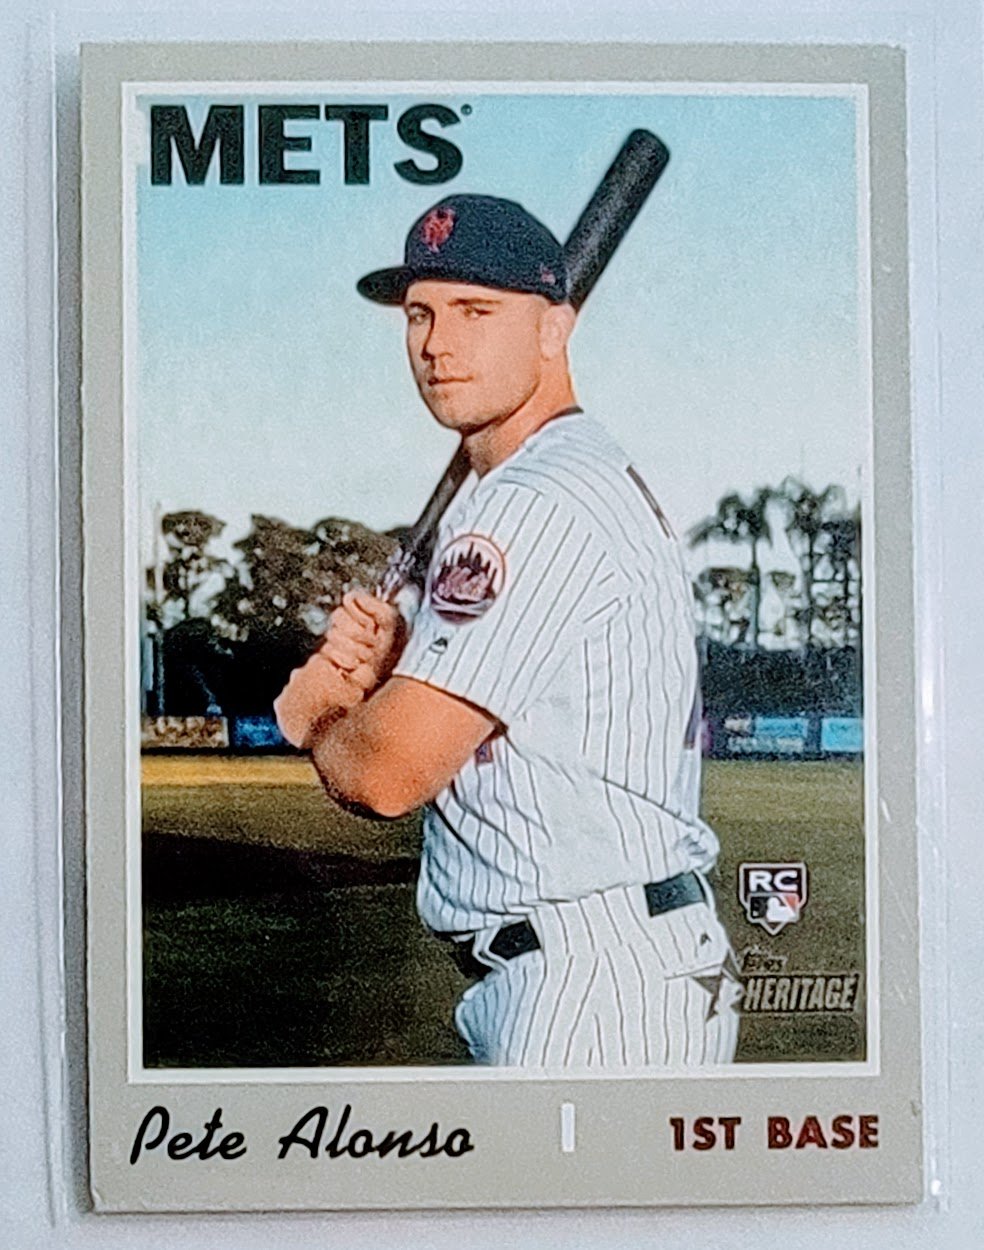 2019 Topps Heritage Pete Alonso Mets Rookie VG Baseball Card TPTV simple Xclusive Collectibles   